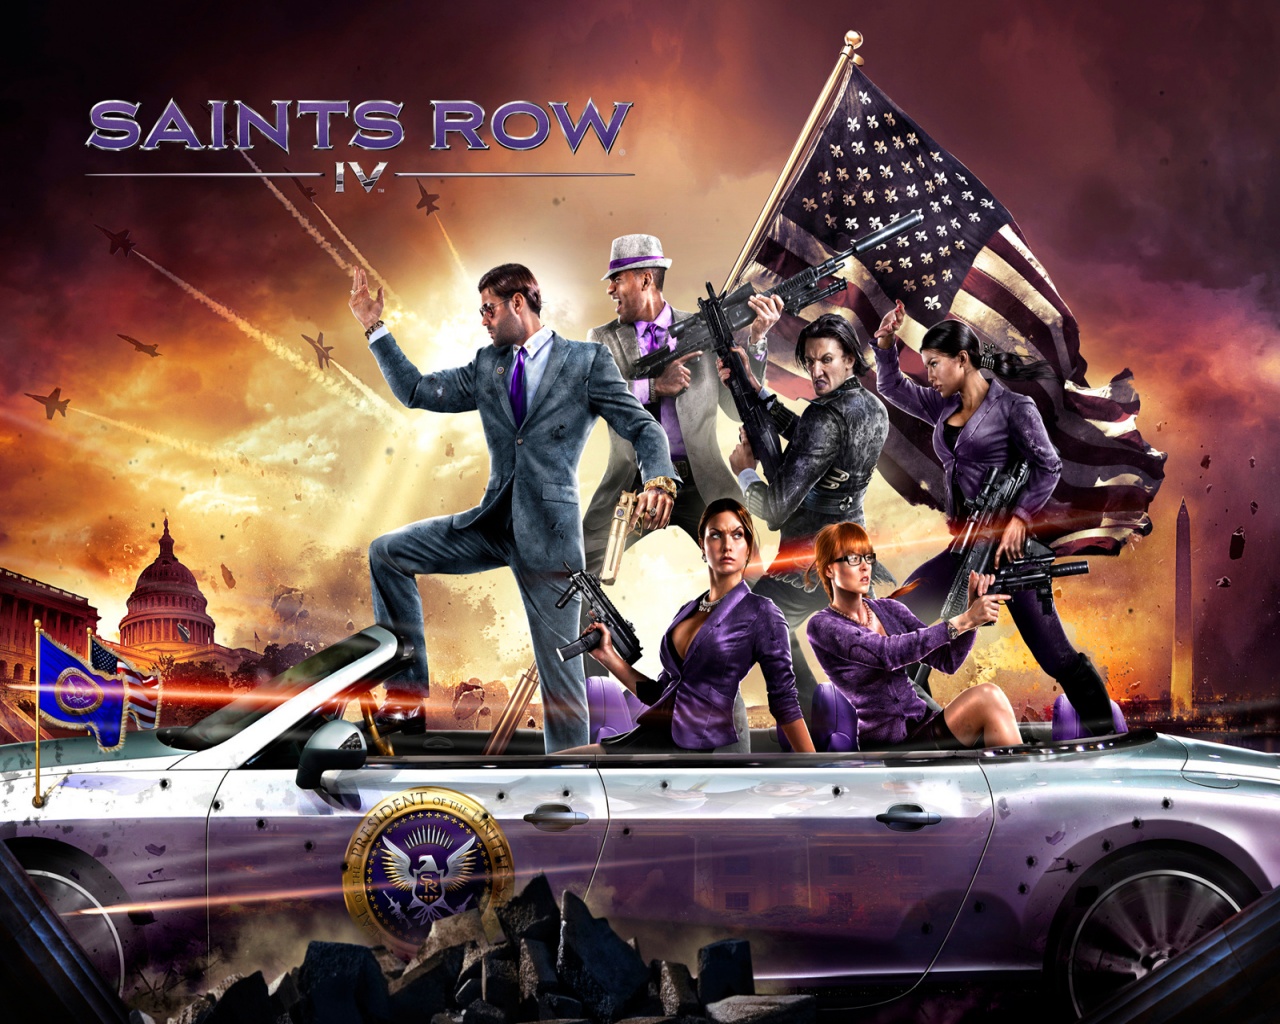 Saints Row 4 Wallpapers in jpg format for free download